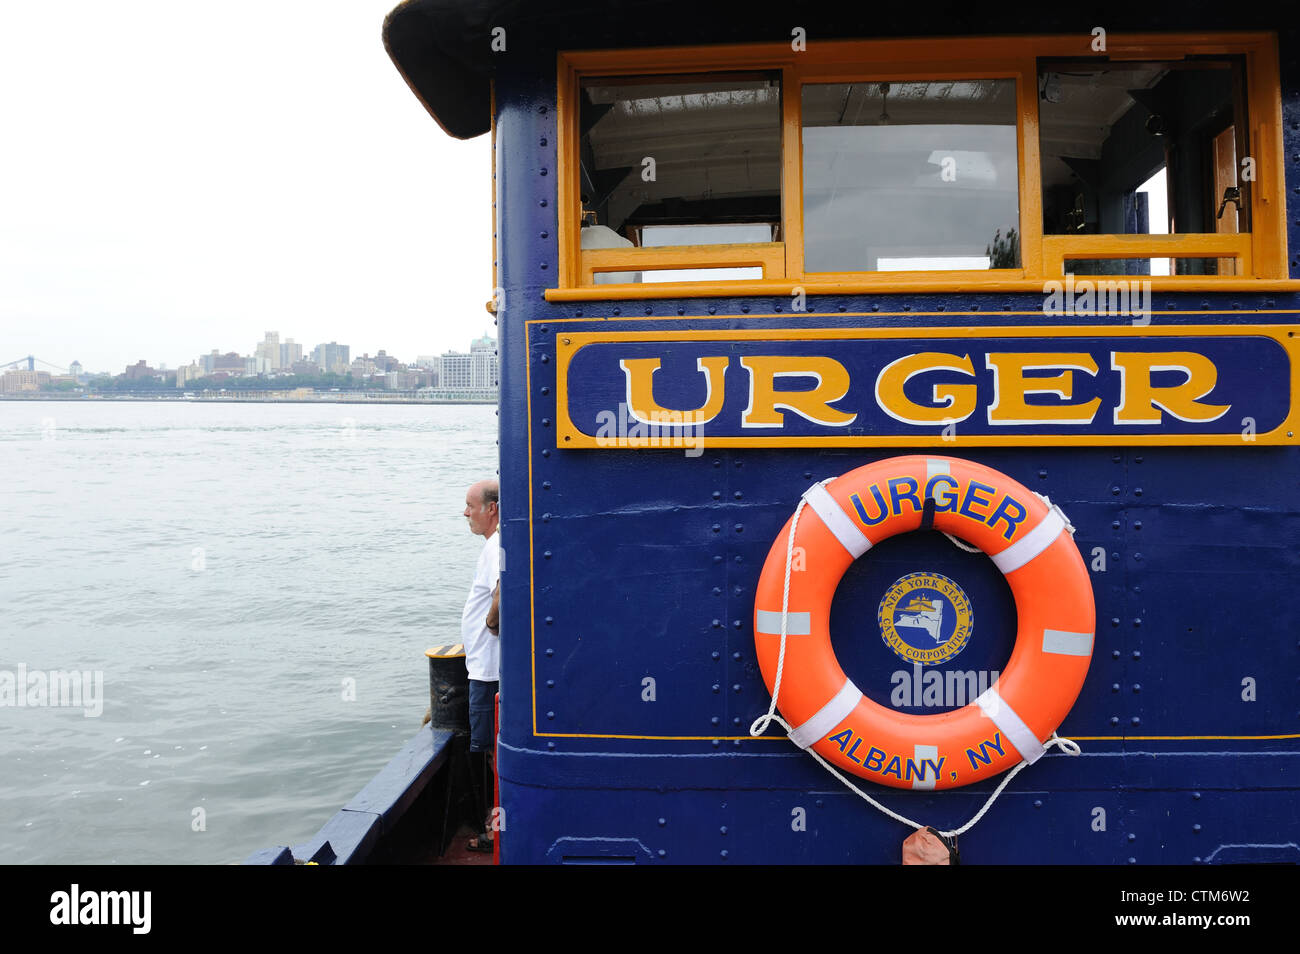 The Urger, launched in 1901, is the oldest operating tugboat in New York State and on the National Registry of Historic Places. Stock Photo